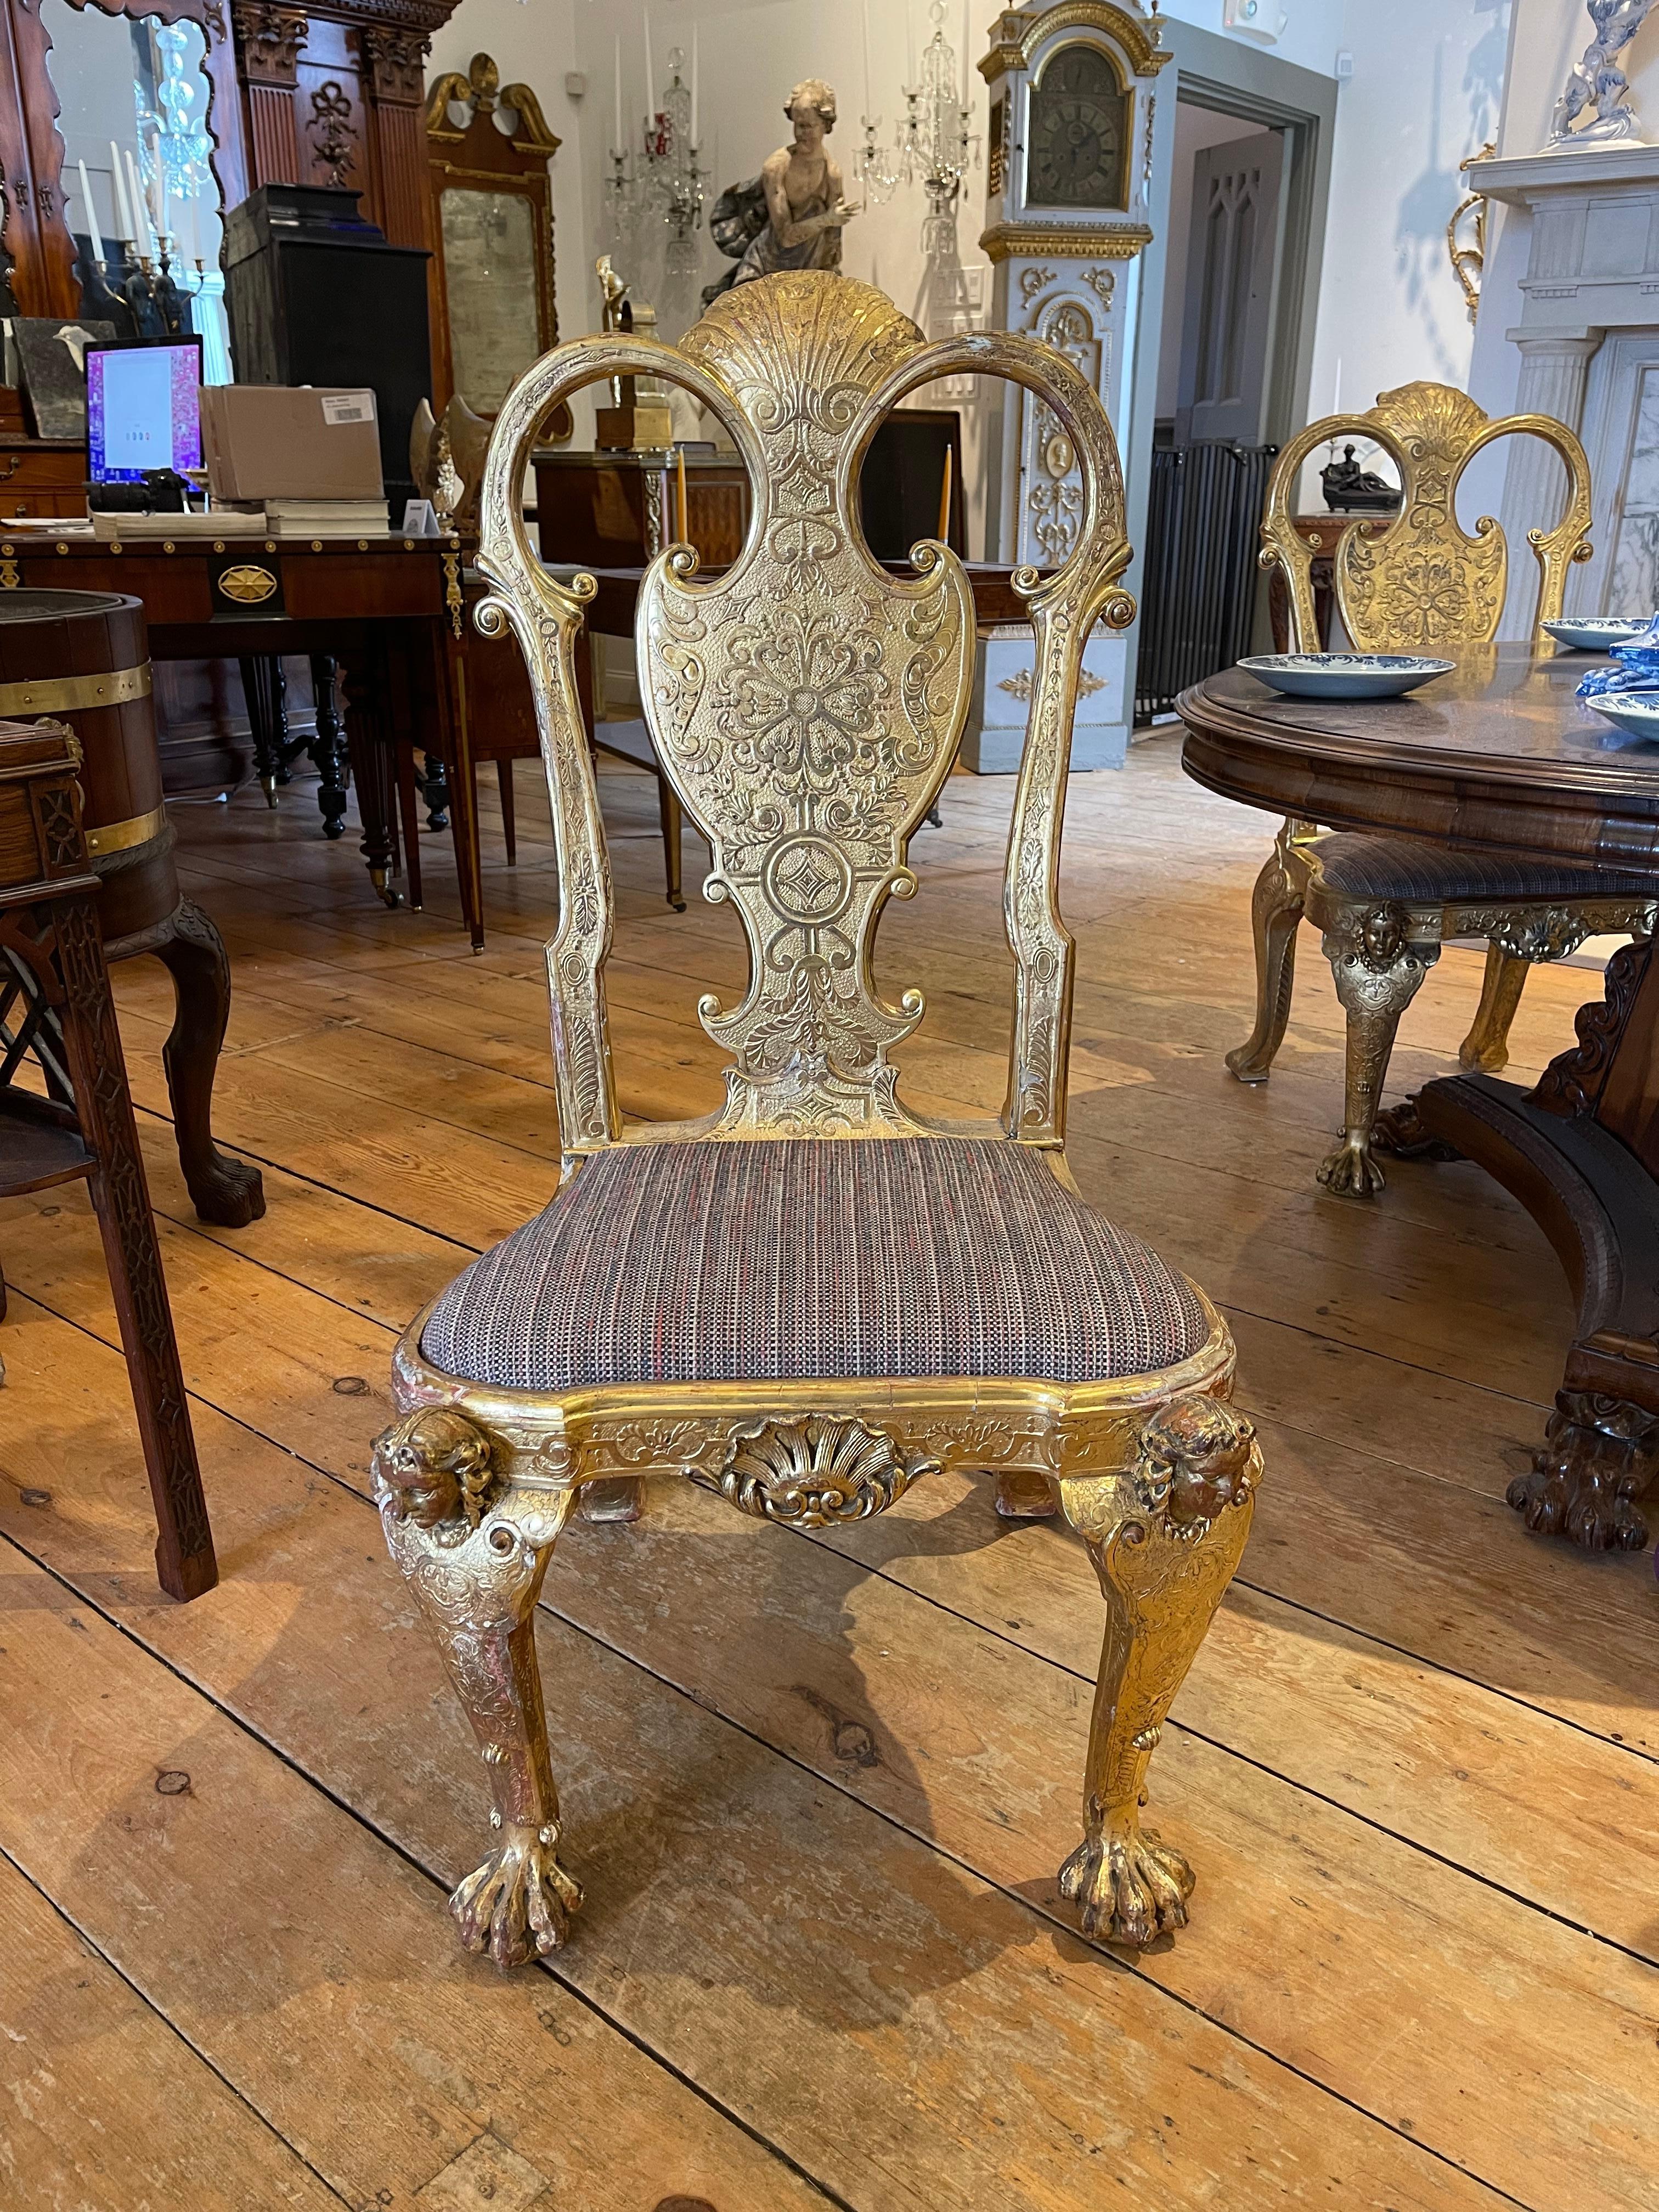 Remarkable Set of Four Queen Anne or George I Style Gilded Side Chairs.  Carved and gilt gesso in original water gilding.  Large, 18th Century Size and proportion.  Magnificent form.  Usable and impressive.

Wear to gilding, some chipping but